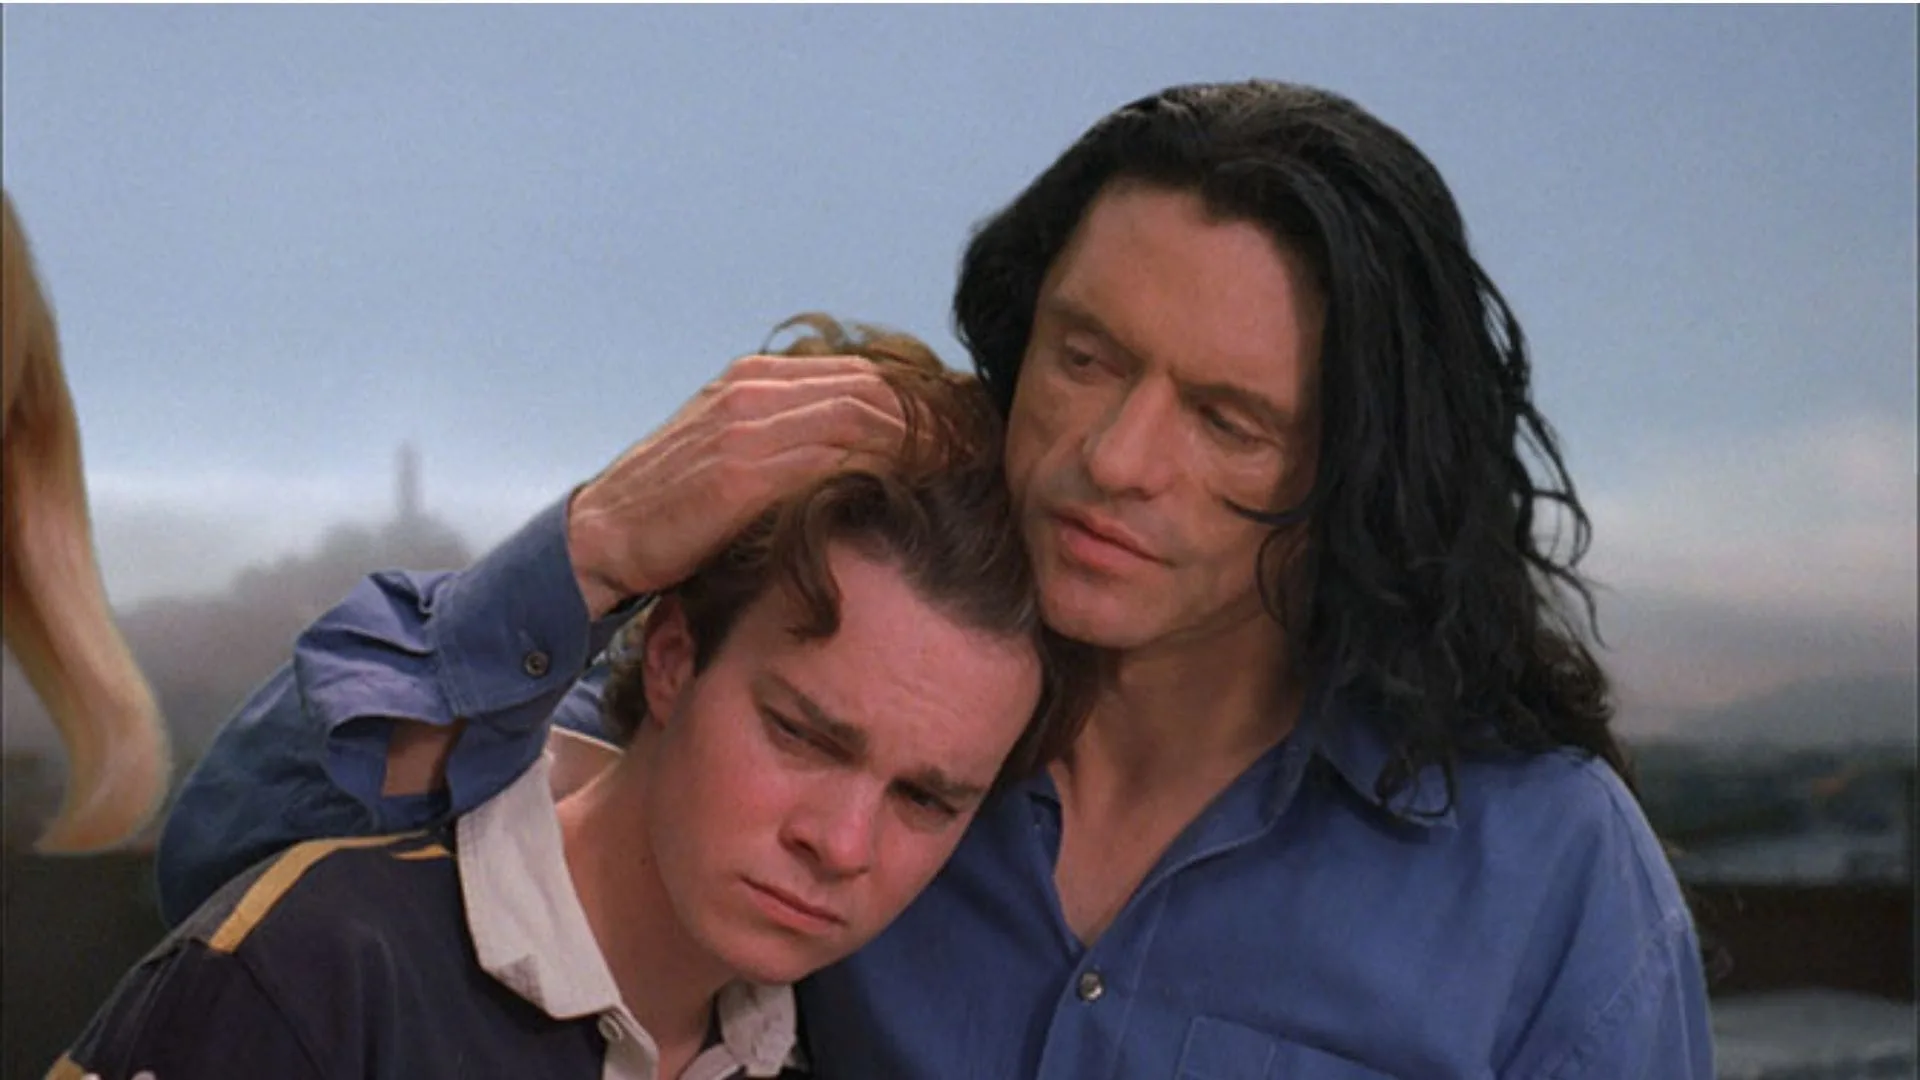 The room